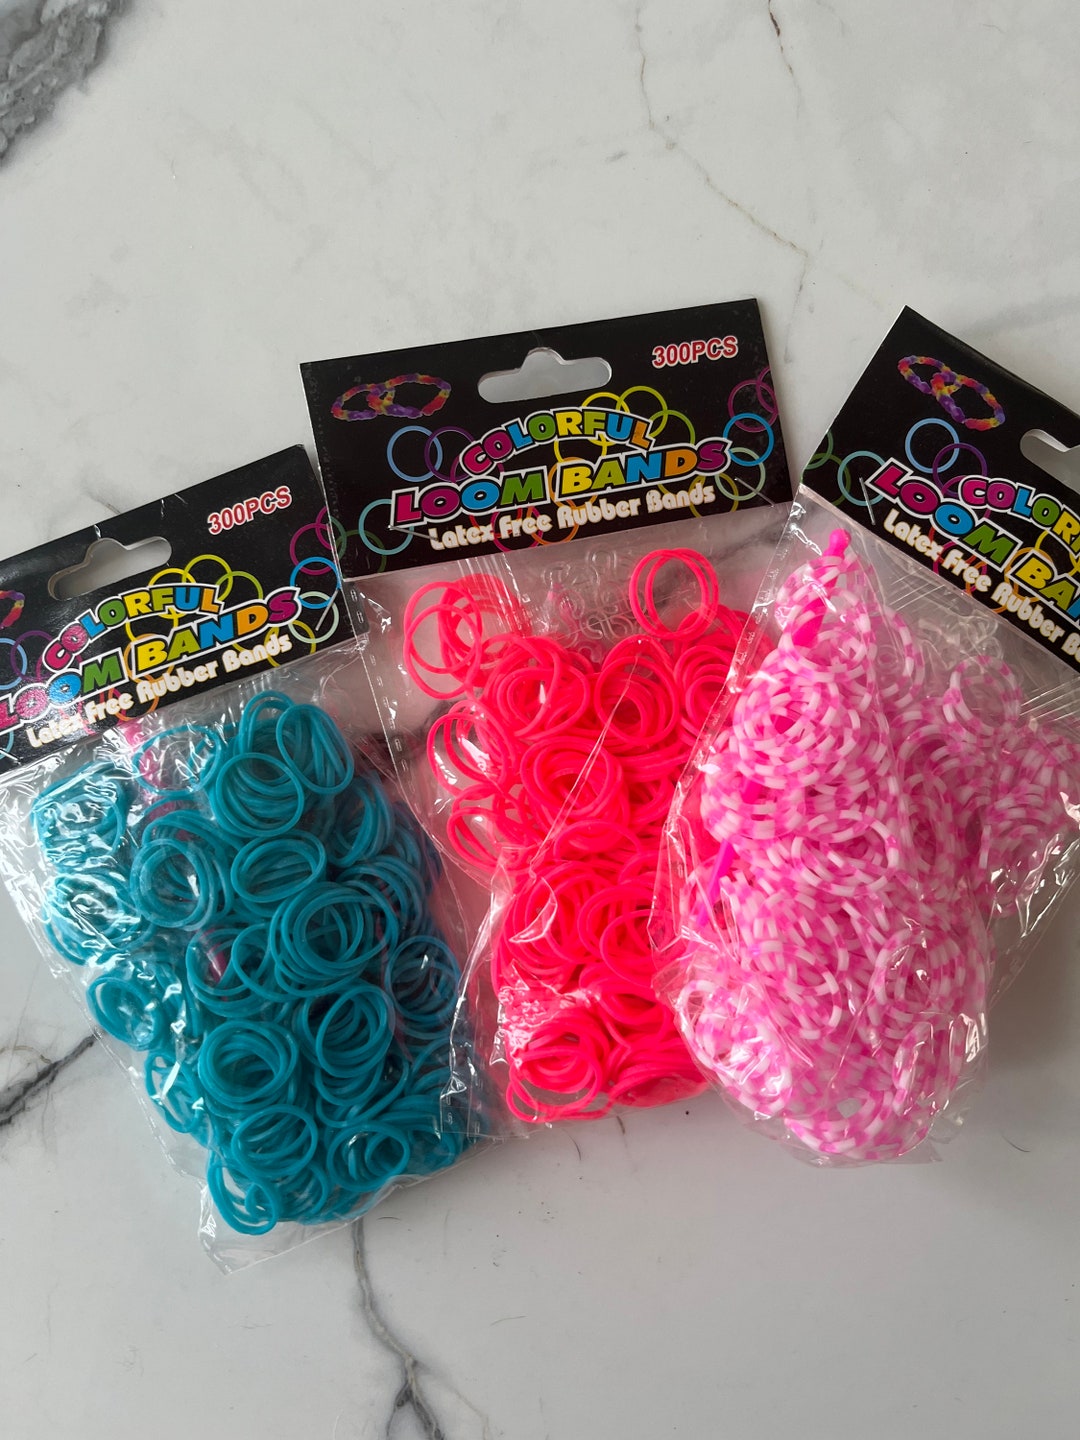 Loom Bandz 300 Magic Light Changing Rubber Loom Bands with 'S' Clips 